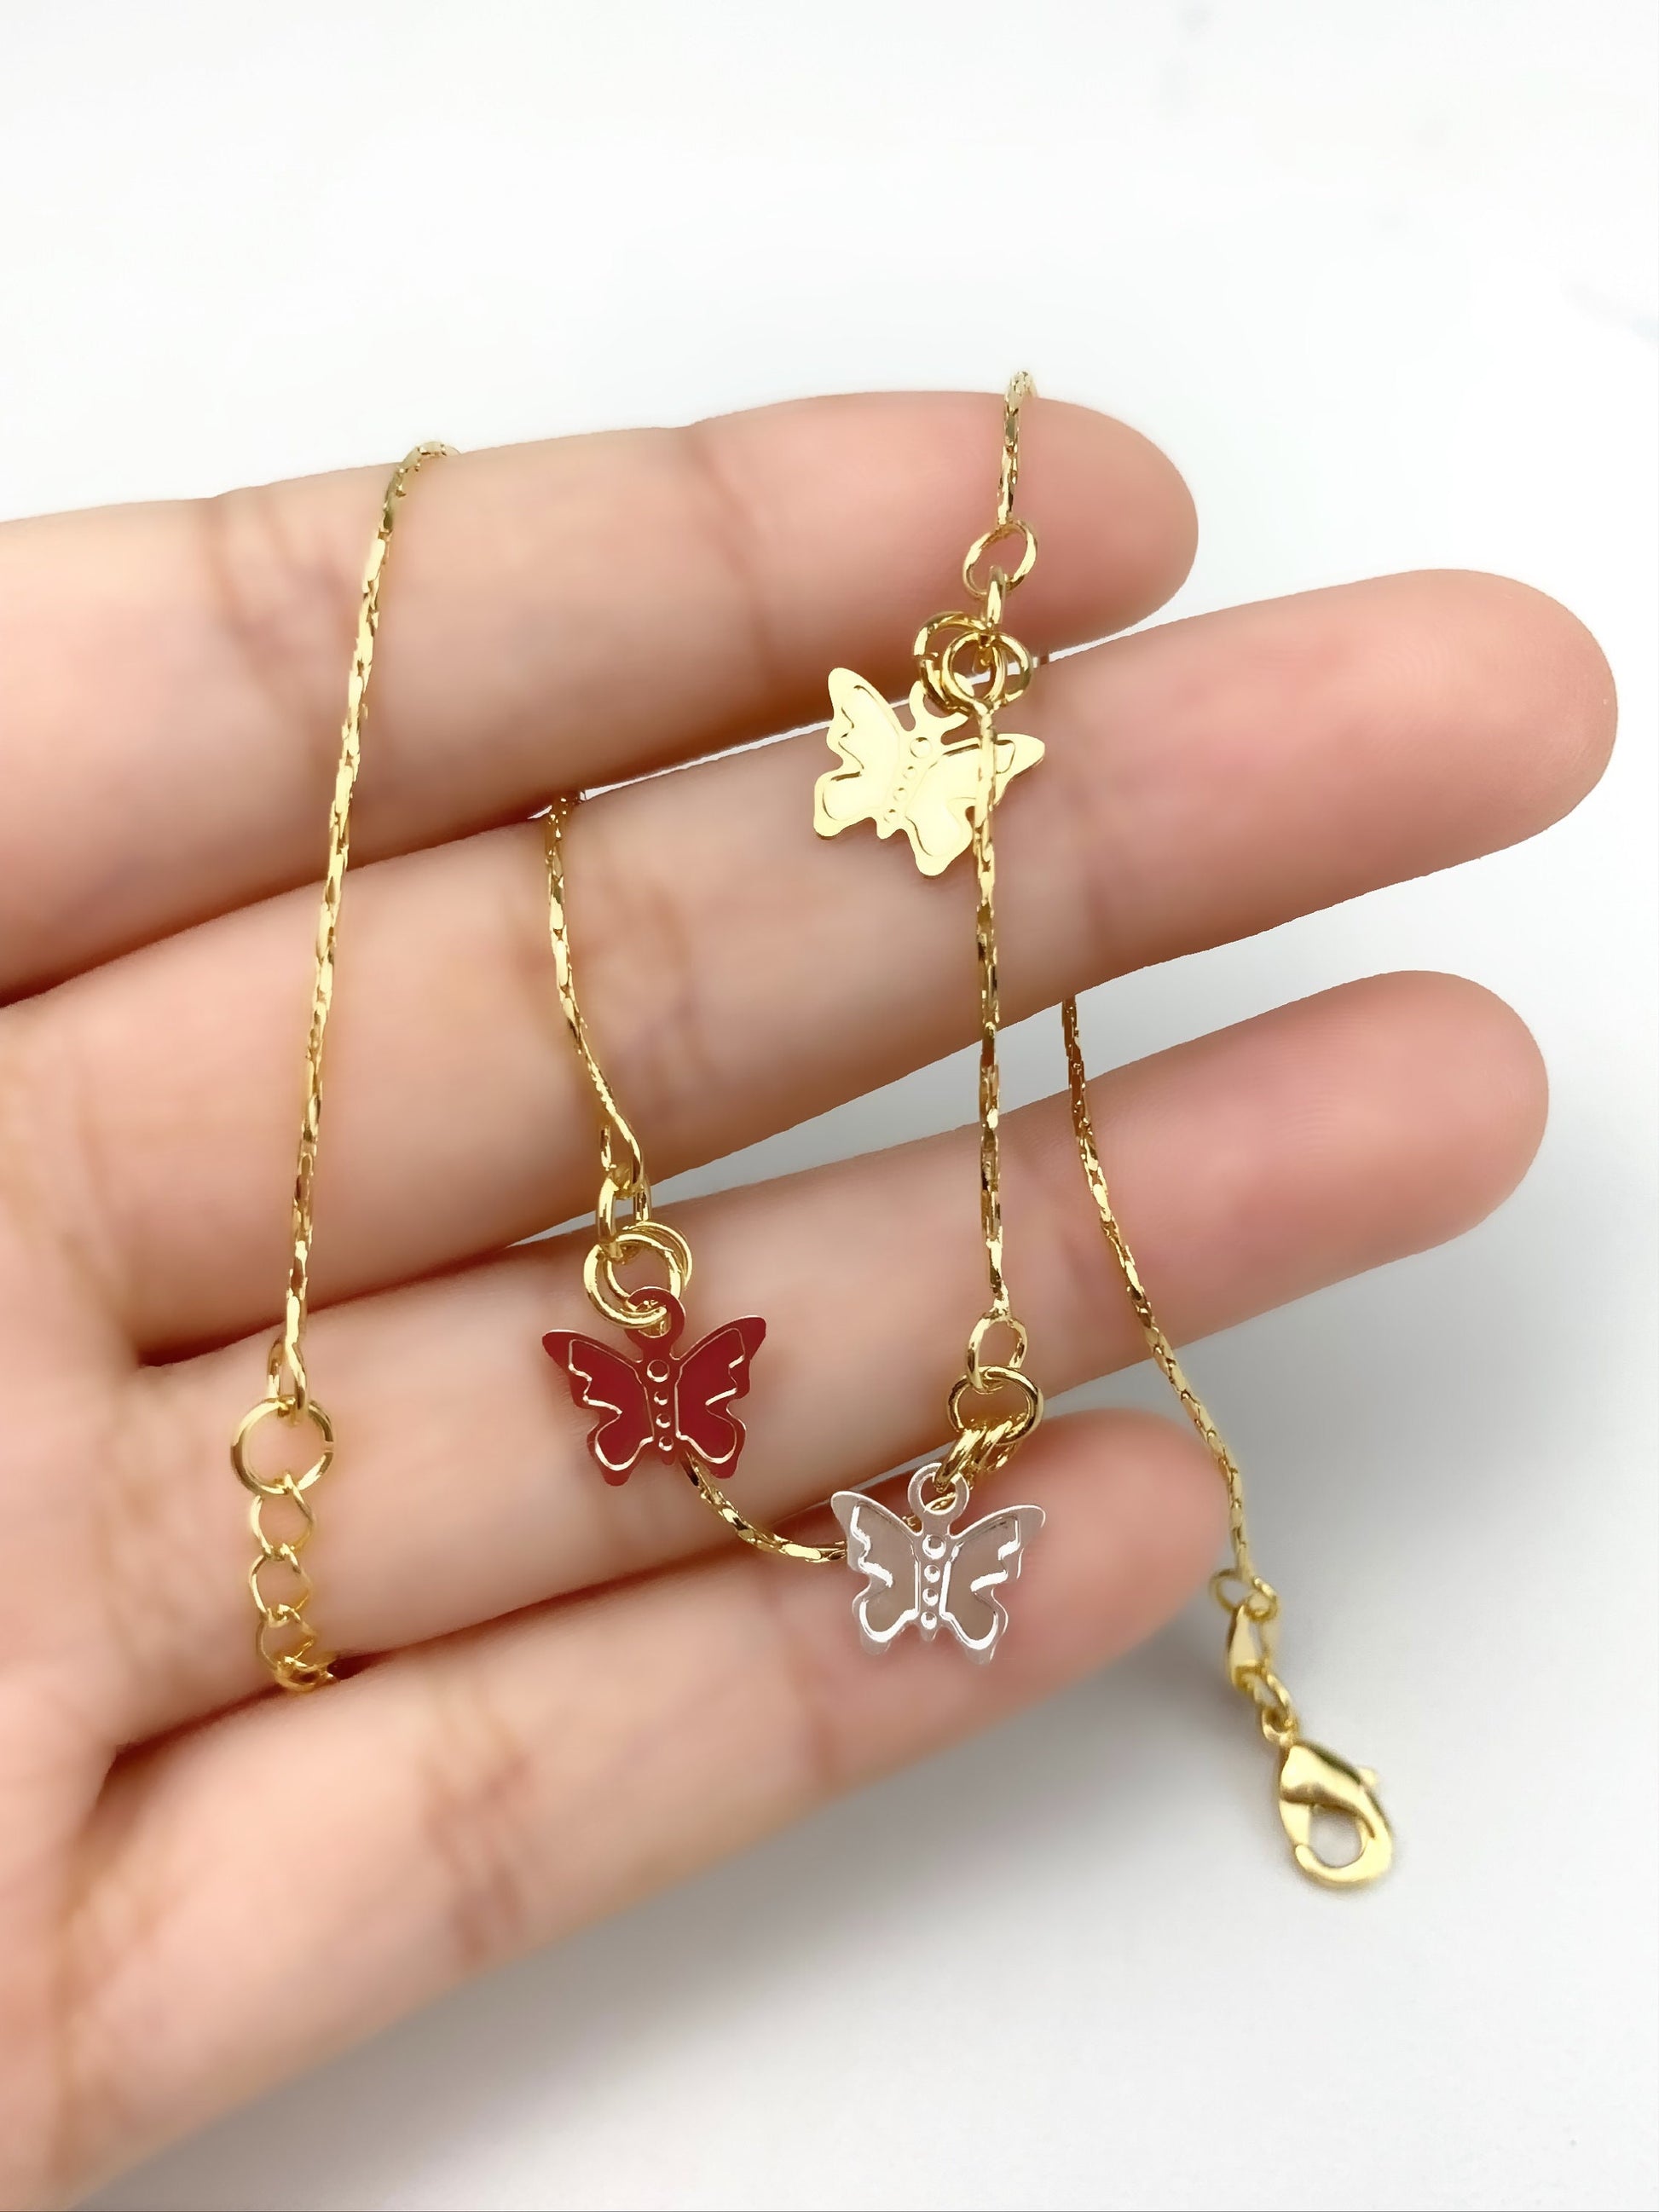 18k Gold Filled three Color Silver, Gold and Pink Gold  Butterfly Anklets Wholesale  Jewelry Supplies